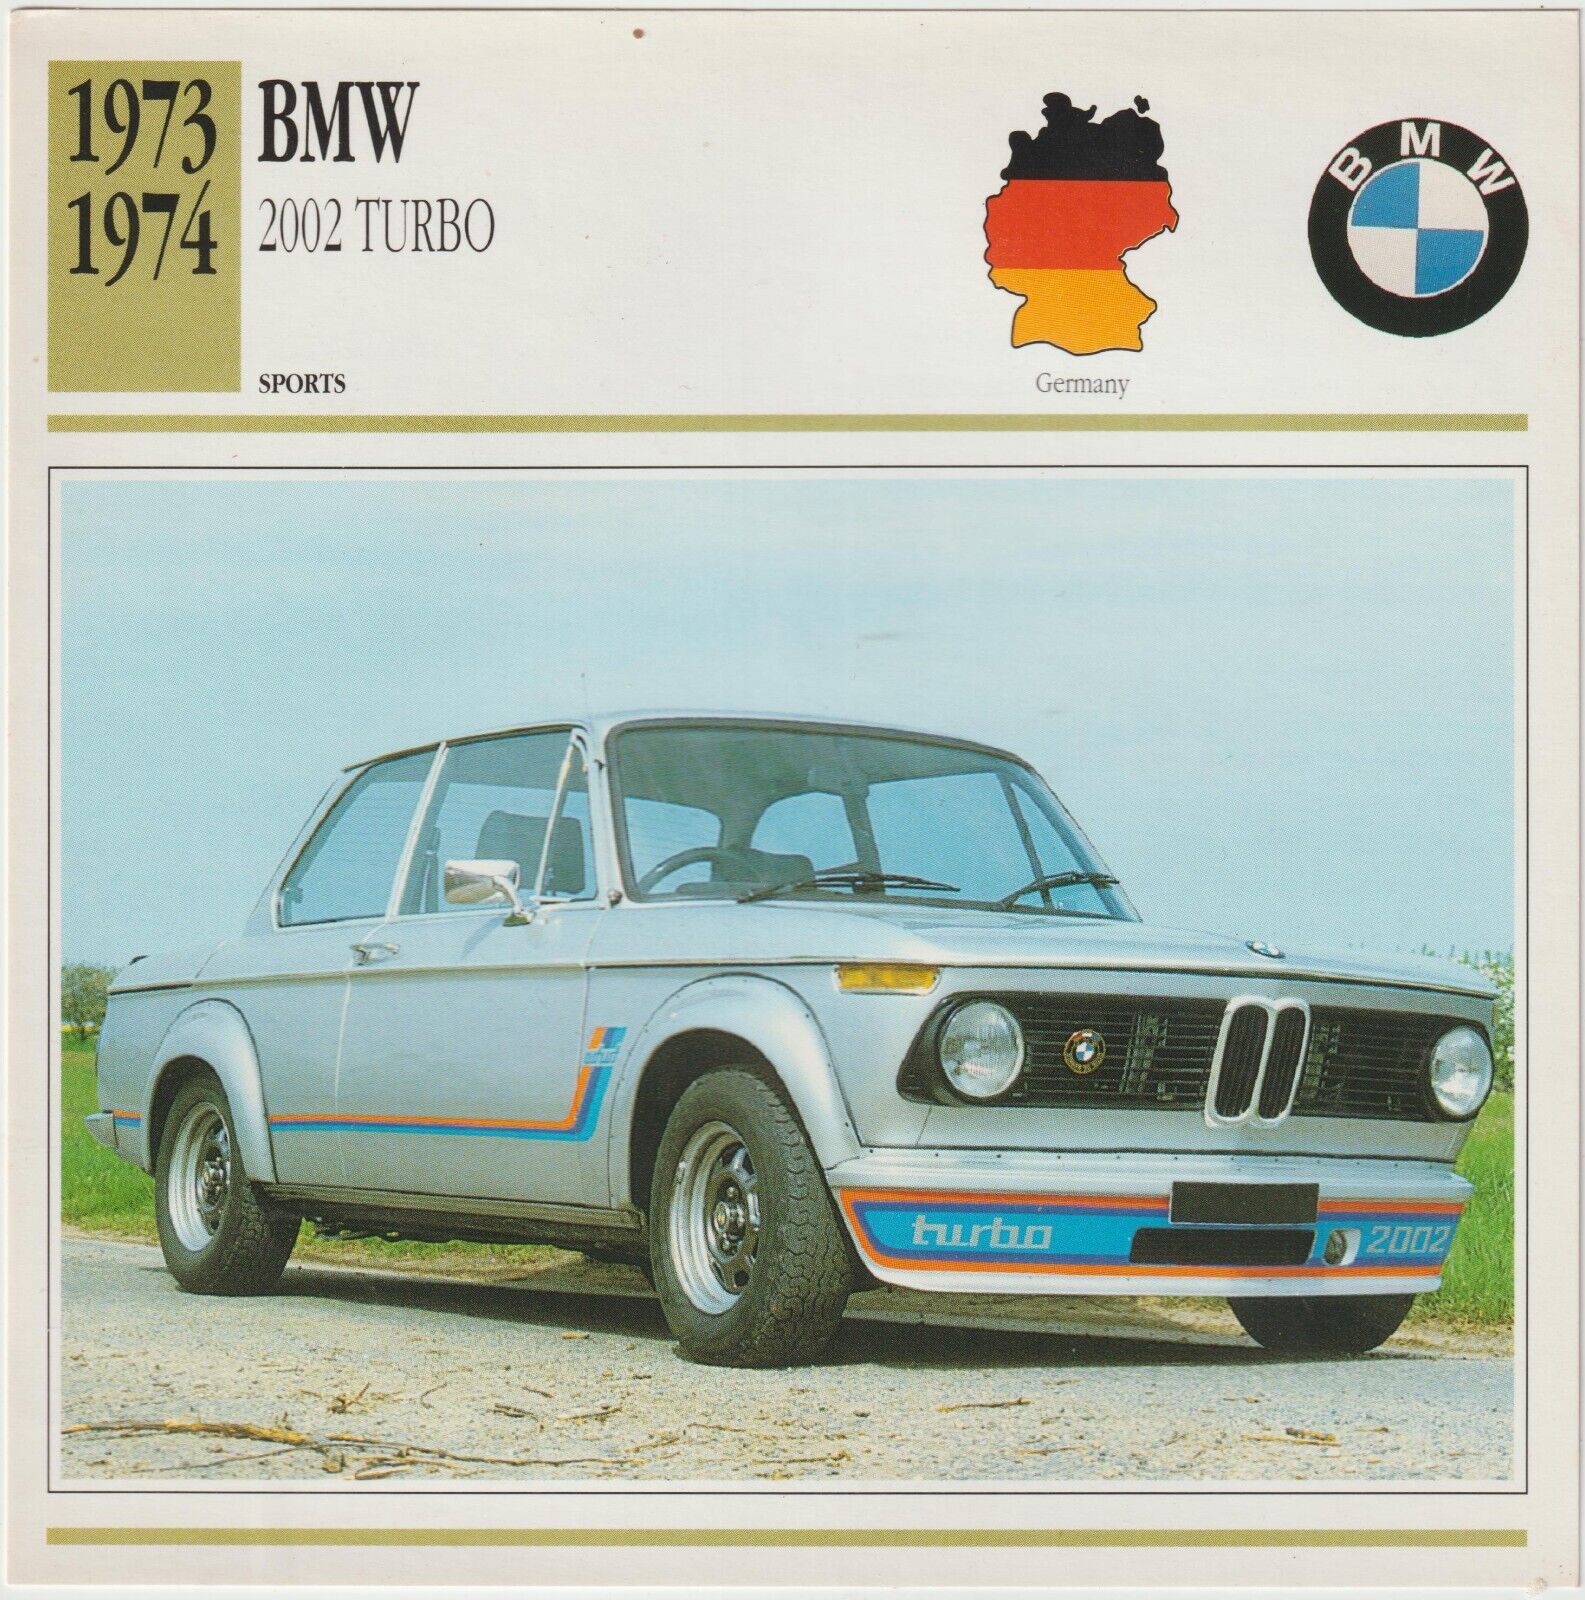 1973 BMW 2002 TURBO - Cars of the World Collector Card